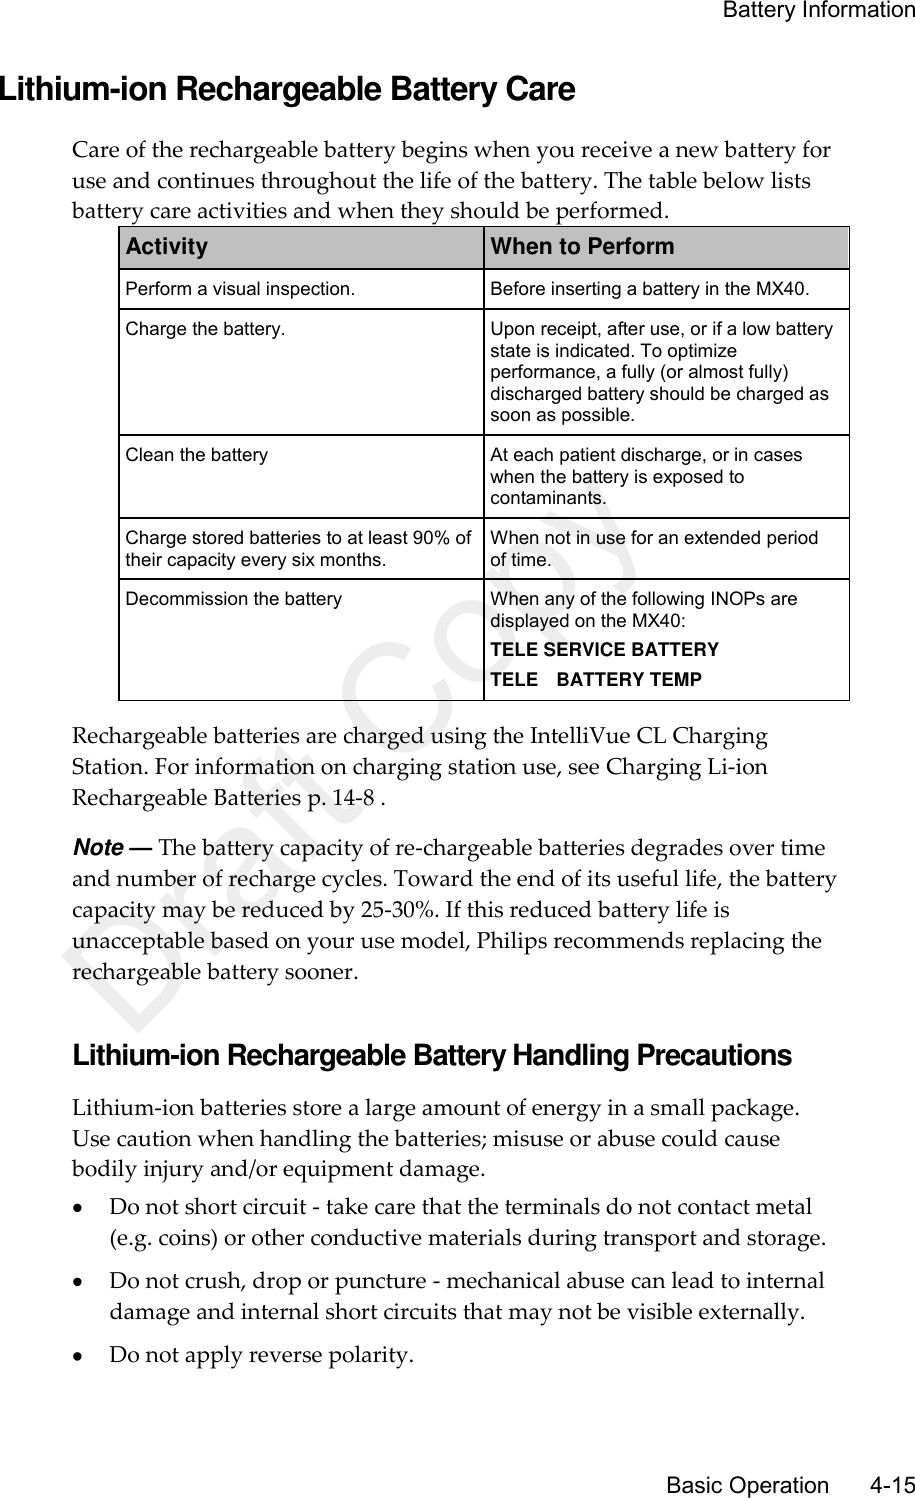     Battery Information       Basic Operation      4-15 Lithium-ion Rechargeable Battery Care Care of the rechargeable battery begins when you receive a new battery for use and continues throughout the life of the battery. The table below lists battery care activities and when they should be performed. Activity When to Perform Perform a visual inspection. Before inserting a battery in the MX40. Charge the battery. Upon receipt, after use, or if a low battery state is indicated. To optimize performance, a fully (or almost fully) discharged battery should be charged as soon as possible. Clean the battery At each patient discharge, or in cases when the battery is exposed to contaminants. Charge stored batteries to at least 90% of their capacity every six months. When not in use for an extended period of time. Decommission the battery When any of the following INOPs are displayed on the MX40: TELE SERVICE BATTERY TELE    BATTERY TEMP Rechargeable batteries are charged using the IntelliVue CL Charging Station. For information on charging station use, see Charging Li-ion Rechargeable Batteries p. 14-8 . Note — The battery capacity of re-chargeable batteries degrades over time and number of recharge cycles. Toward the end of its useful life, the battery capacity may be reduced by 25-30%. If this reduced battery life is unacceptable based on your use model, Philips recommends replacing the rechargeable battery sooner.  Lithium-ion Rechargeable Battery Handling Precautions Lithium-ion batteries store a large amount of energy in a small package. Use caution when handling the batteries; misuse or abuse could cause bodily injury and/or equipment damage.  Do not short circuit - take care that the terminals do not contact metal (e.g. coins) or other conductive materials during transport and storage.  Do not crush, drop or puncture - mechanical abuse can lead to internal damage and internal short circuits that may not be visible externally.  Do not apply reverse polarity. Draft Copy